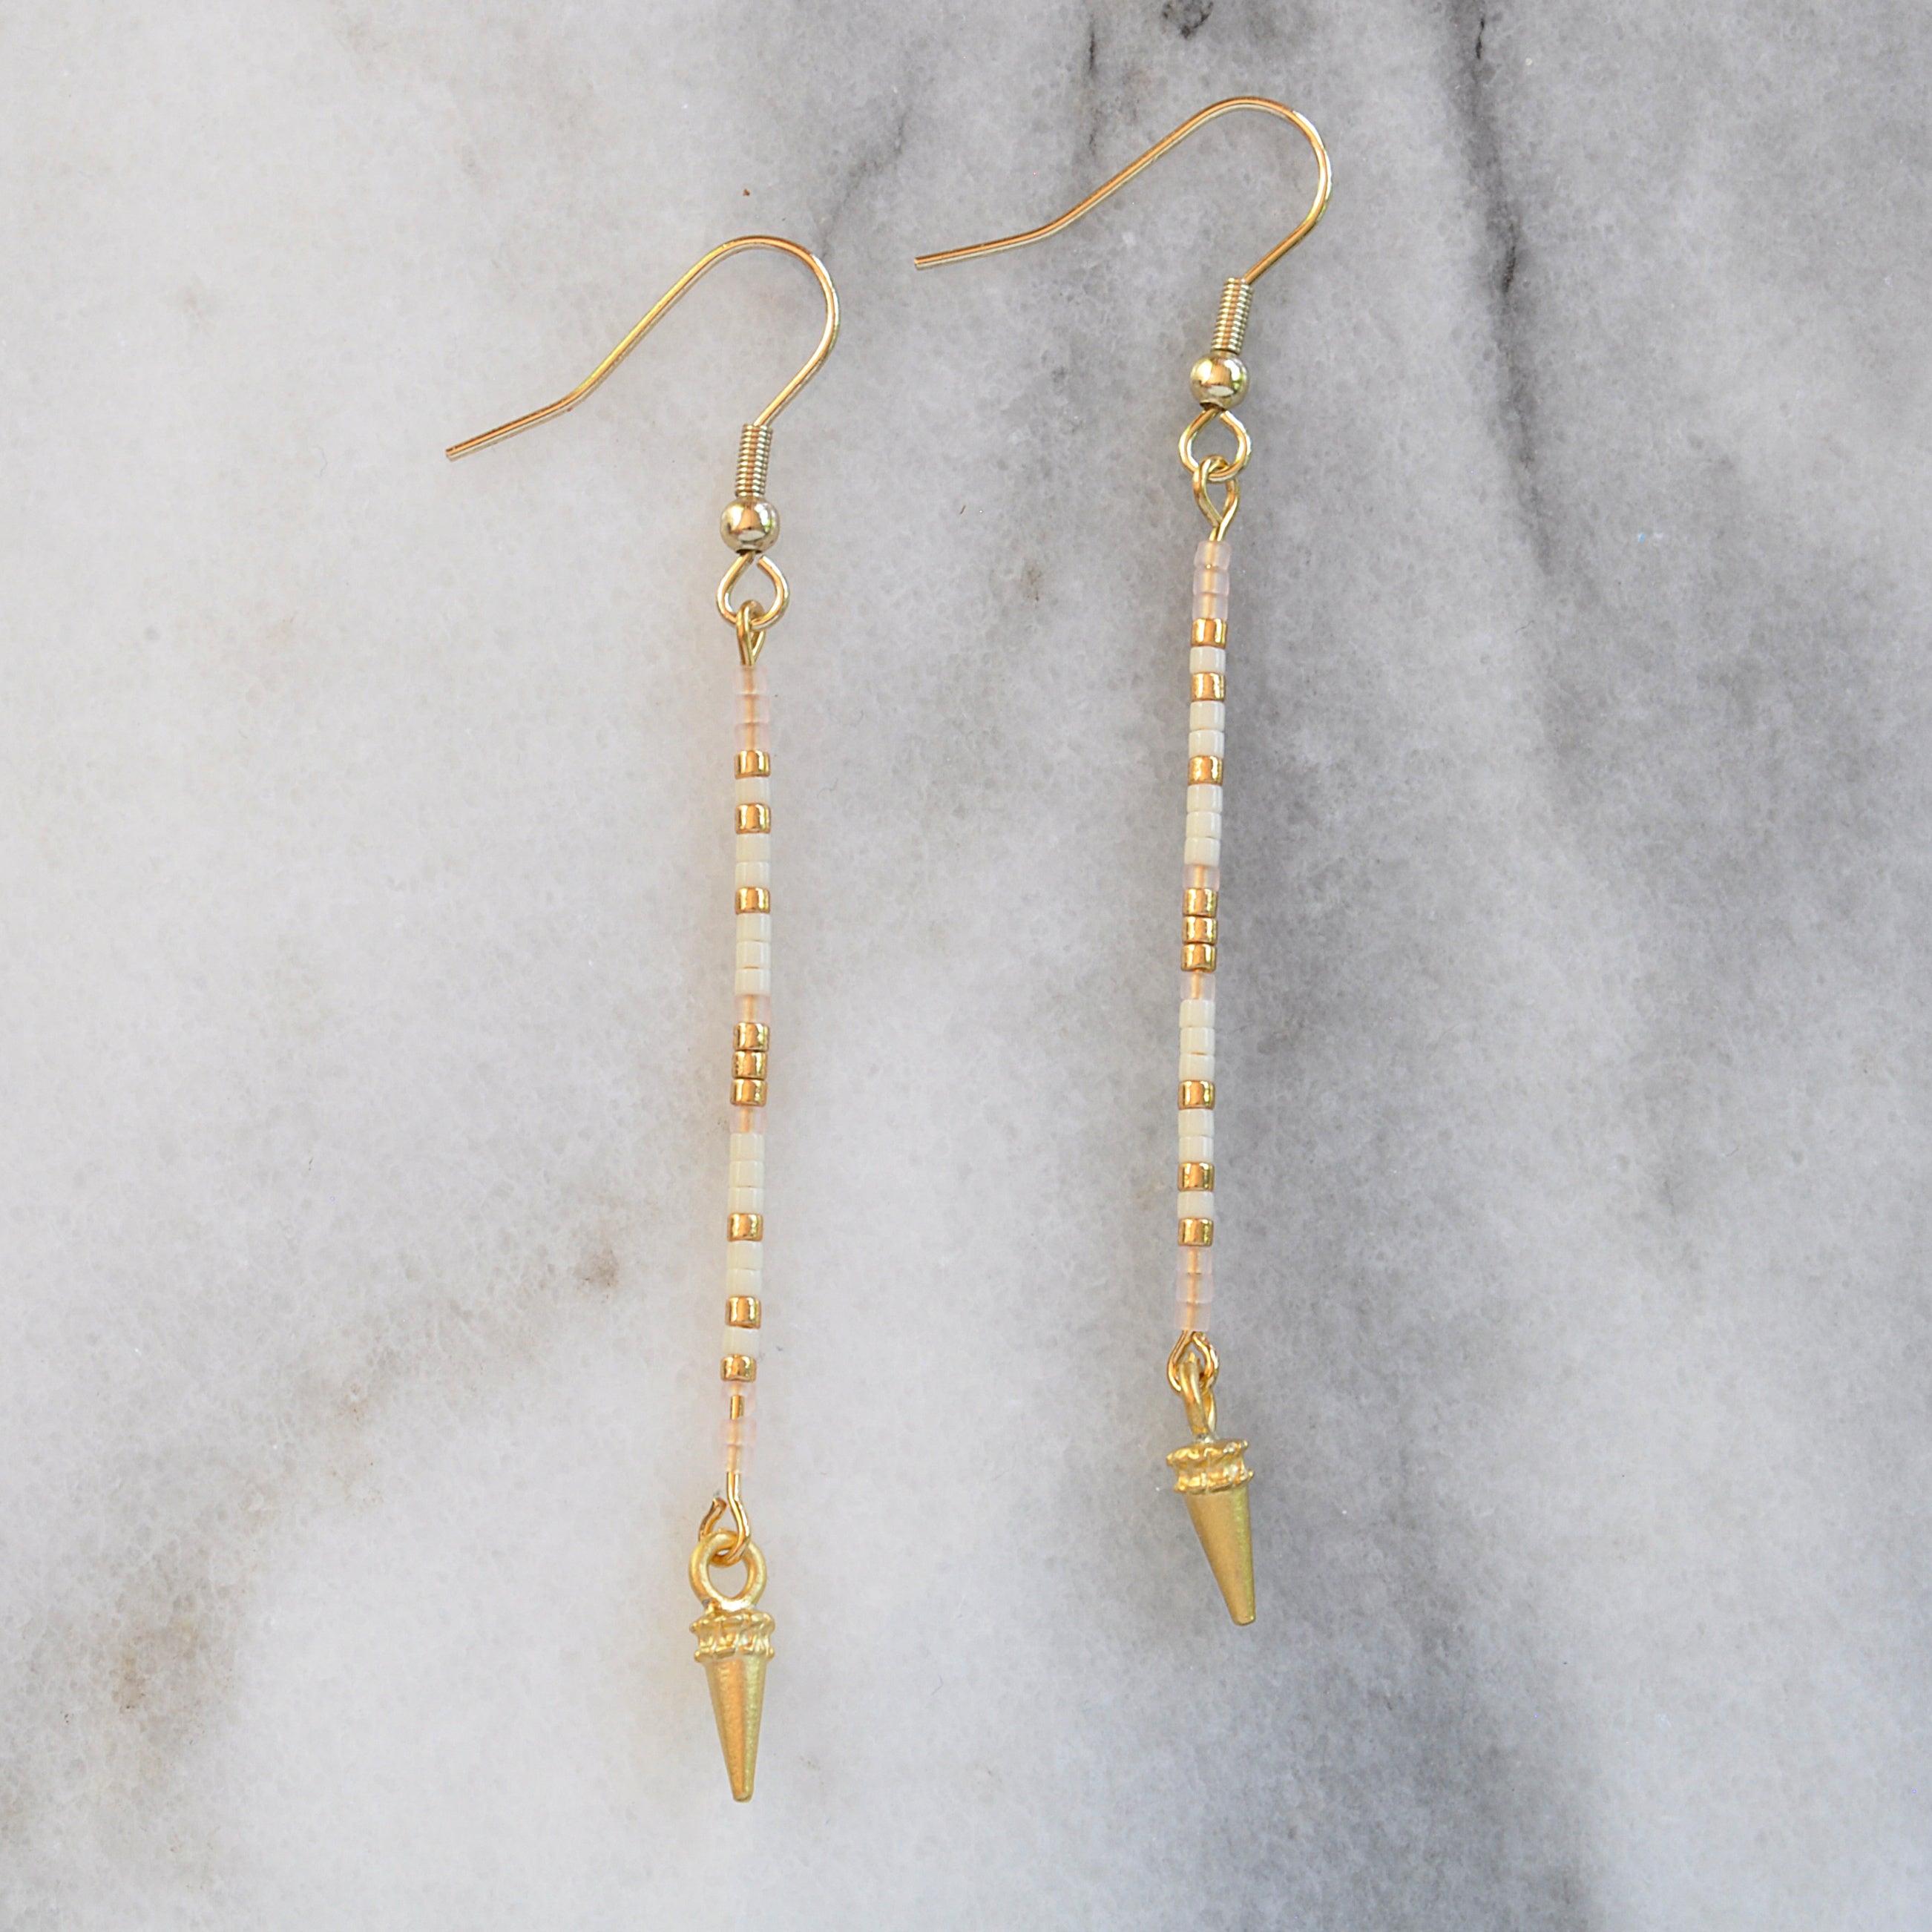 The Ones pattern in long lean stick earrings by Libby & Smee